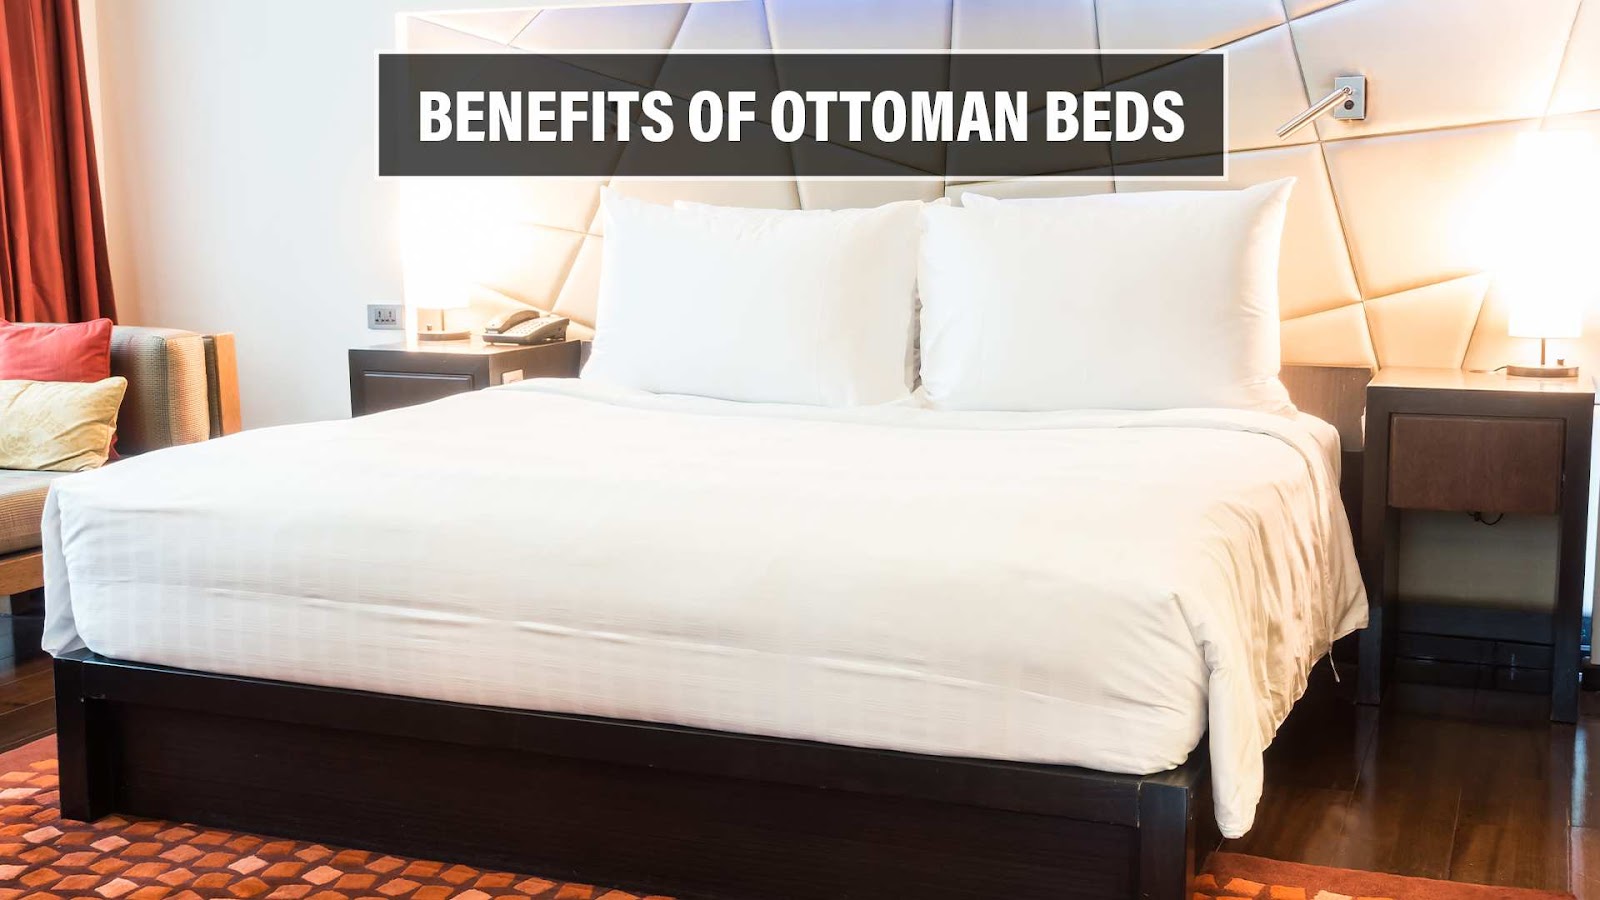 Benefits of Ottoman Beds